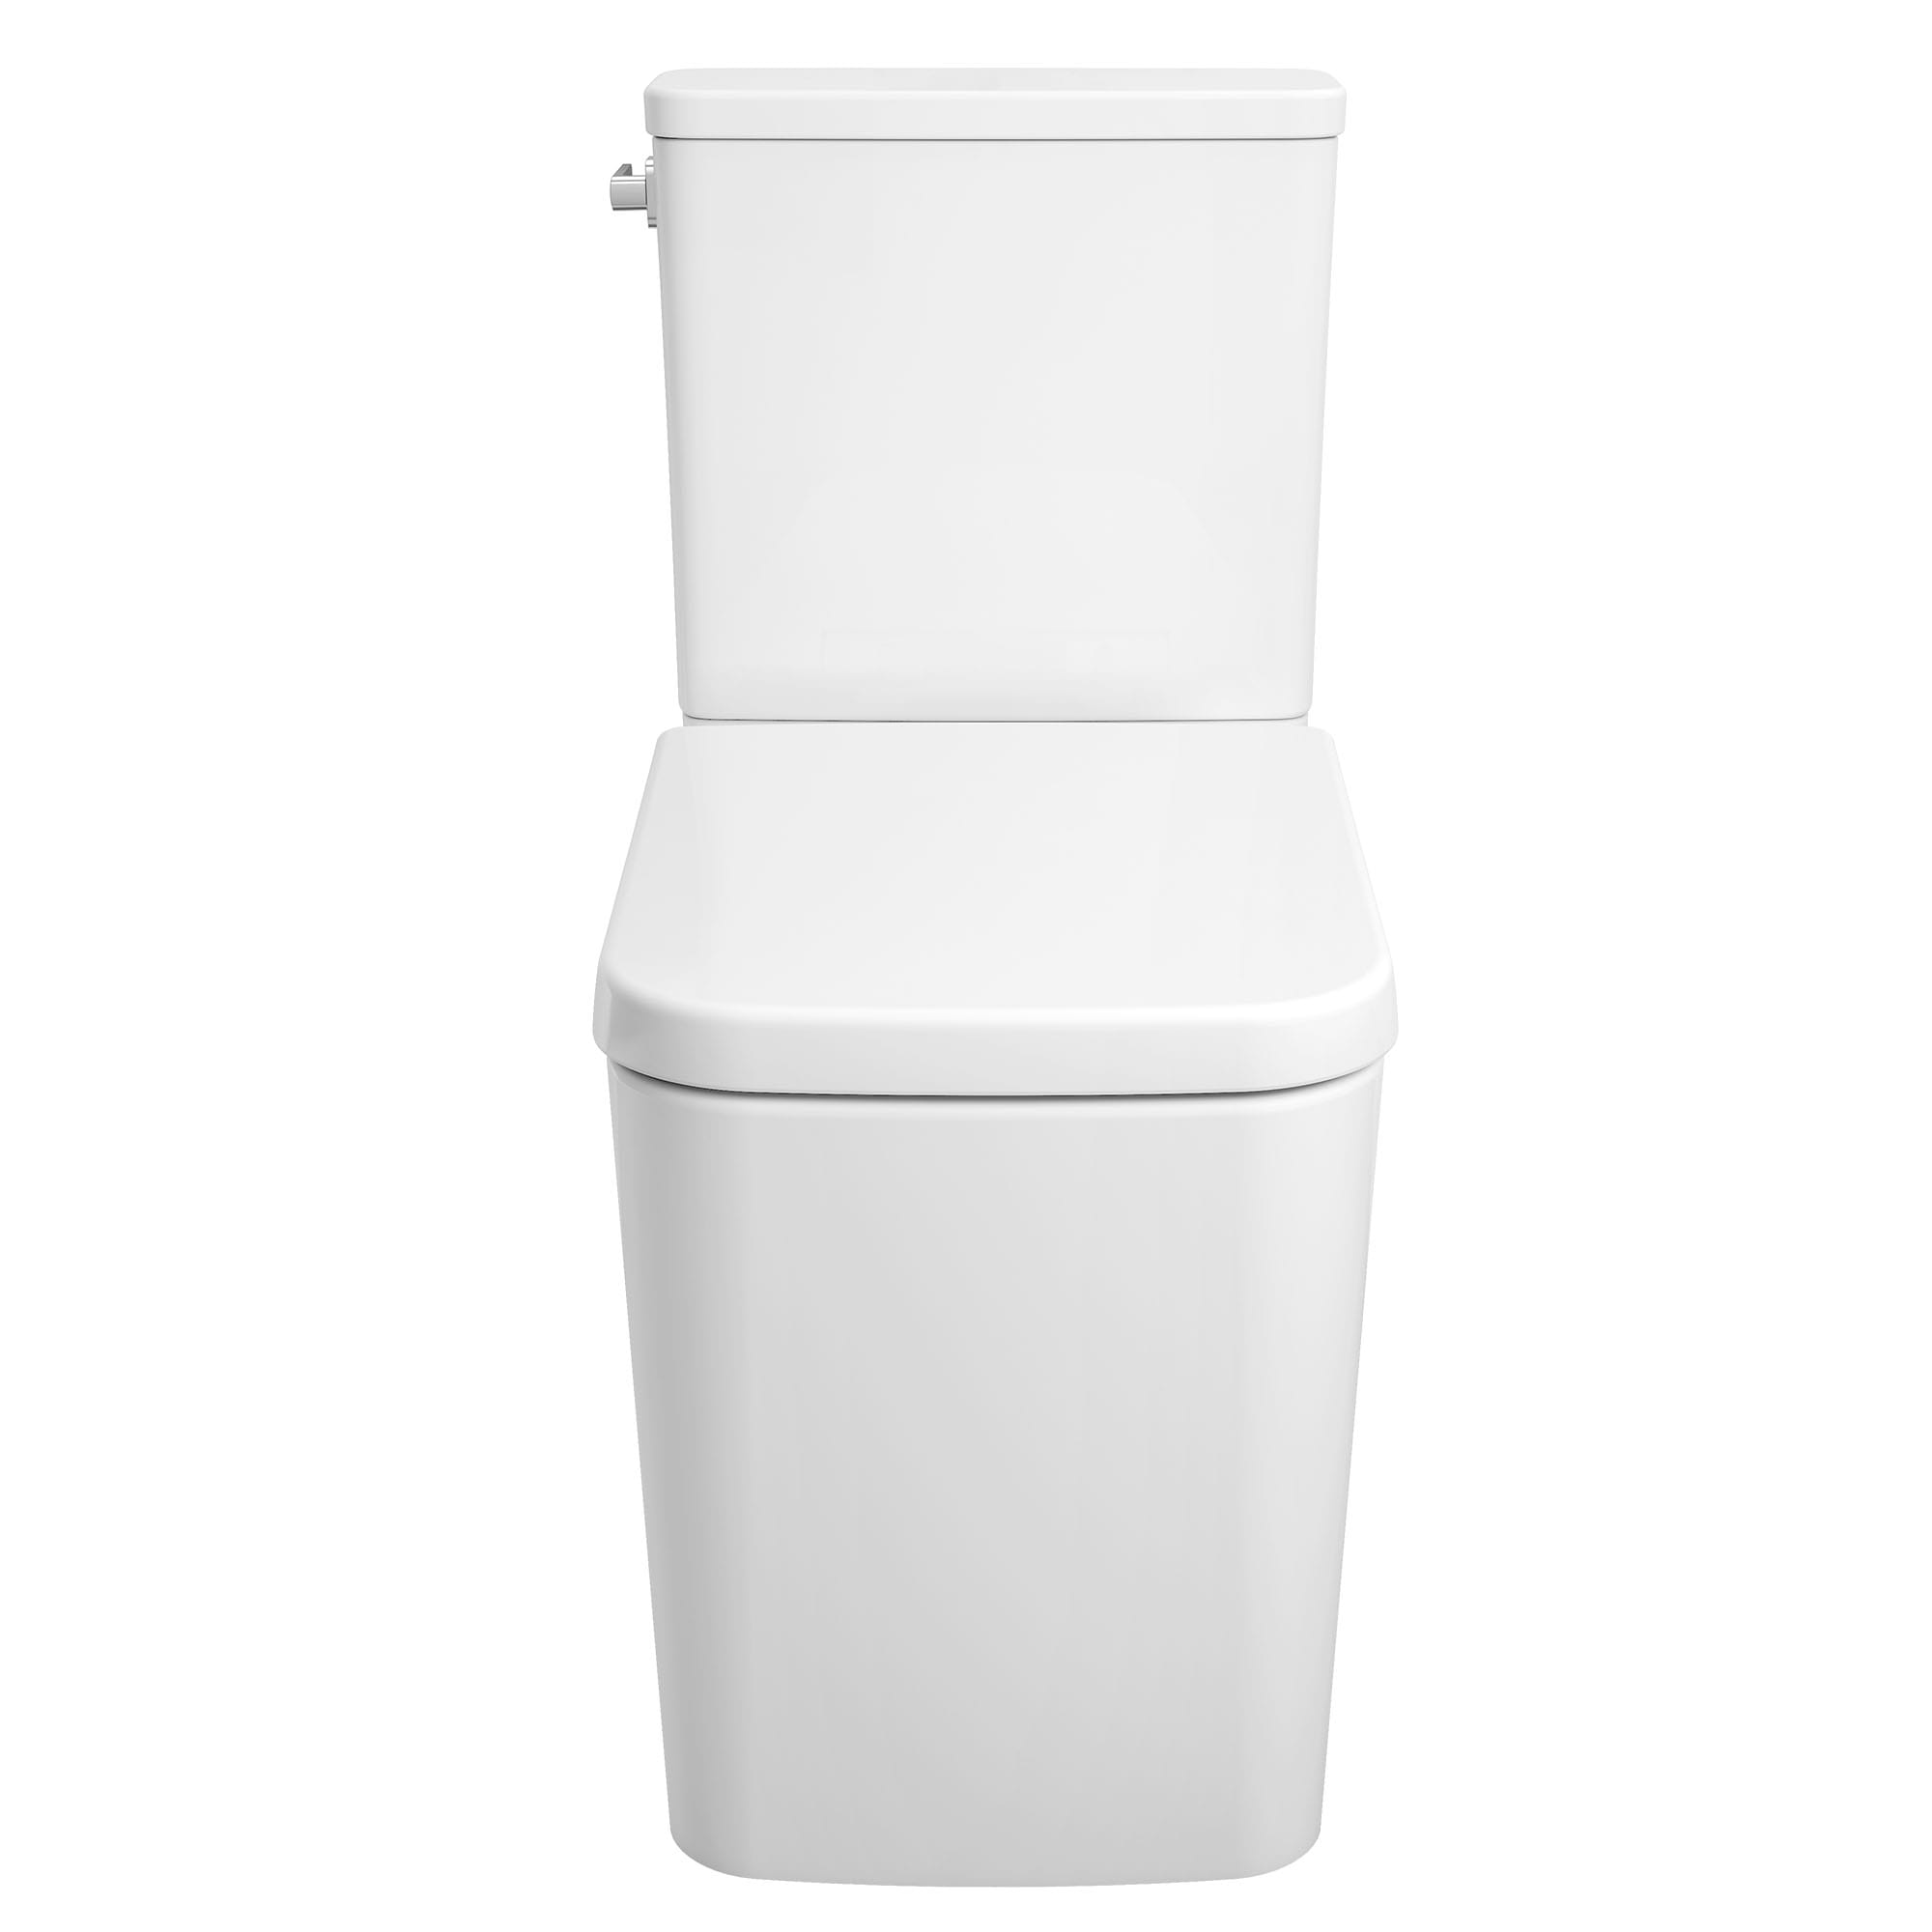 Two-piece Right Height Elongated Toilet with seat, Left-Hand Trip Lever